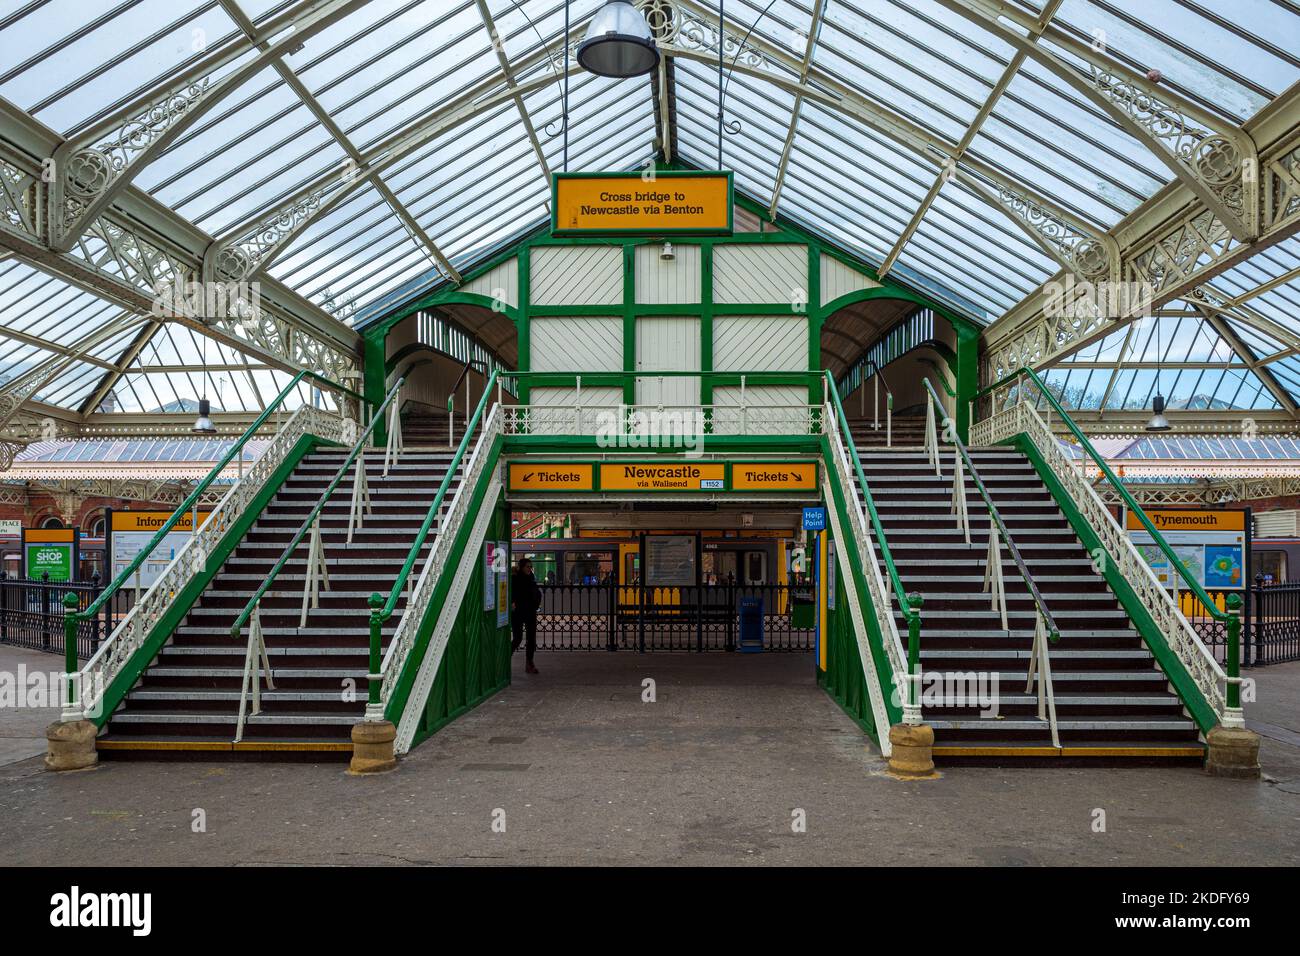 Tynemouth Station Concourse. Tynemouth Metro Station is a Tyne and Wear Metro station, originally opened in 1882 and joined the Metro network in 1980. Stock Photo